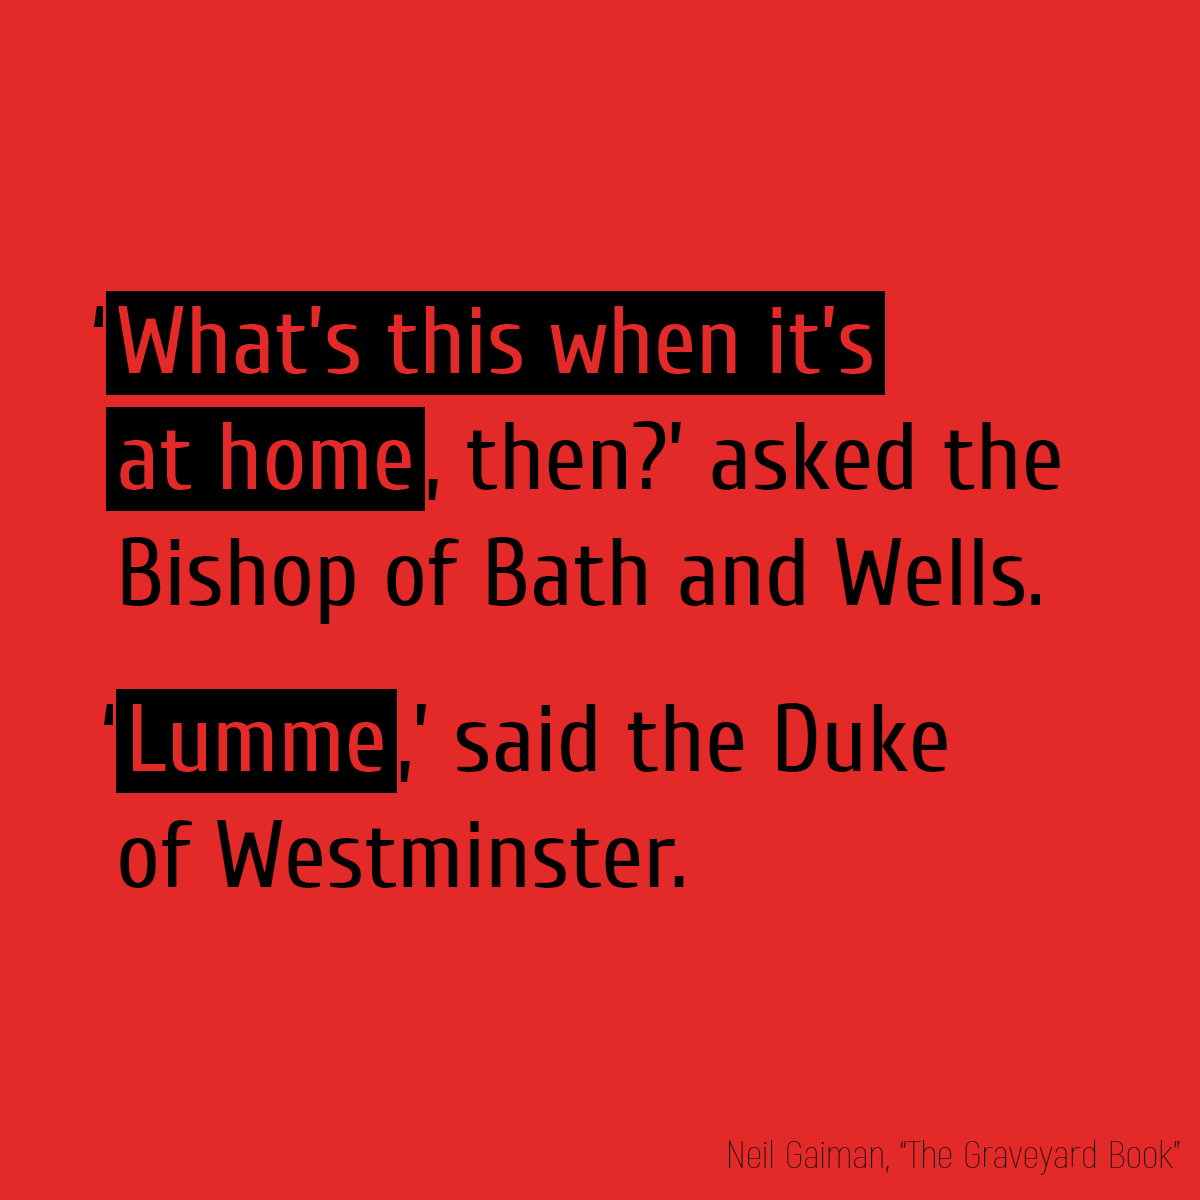 ‘**What’s this when it’s at home**, then?’ asked the Bishop of Bath and Wells. ‘**Lumme**,’ said the Duke of Westminster.